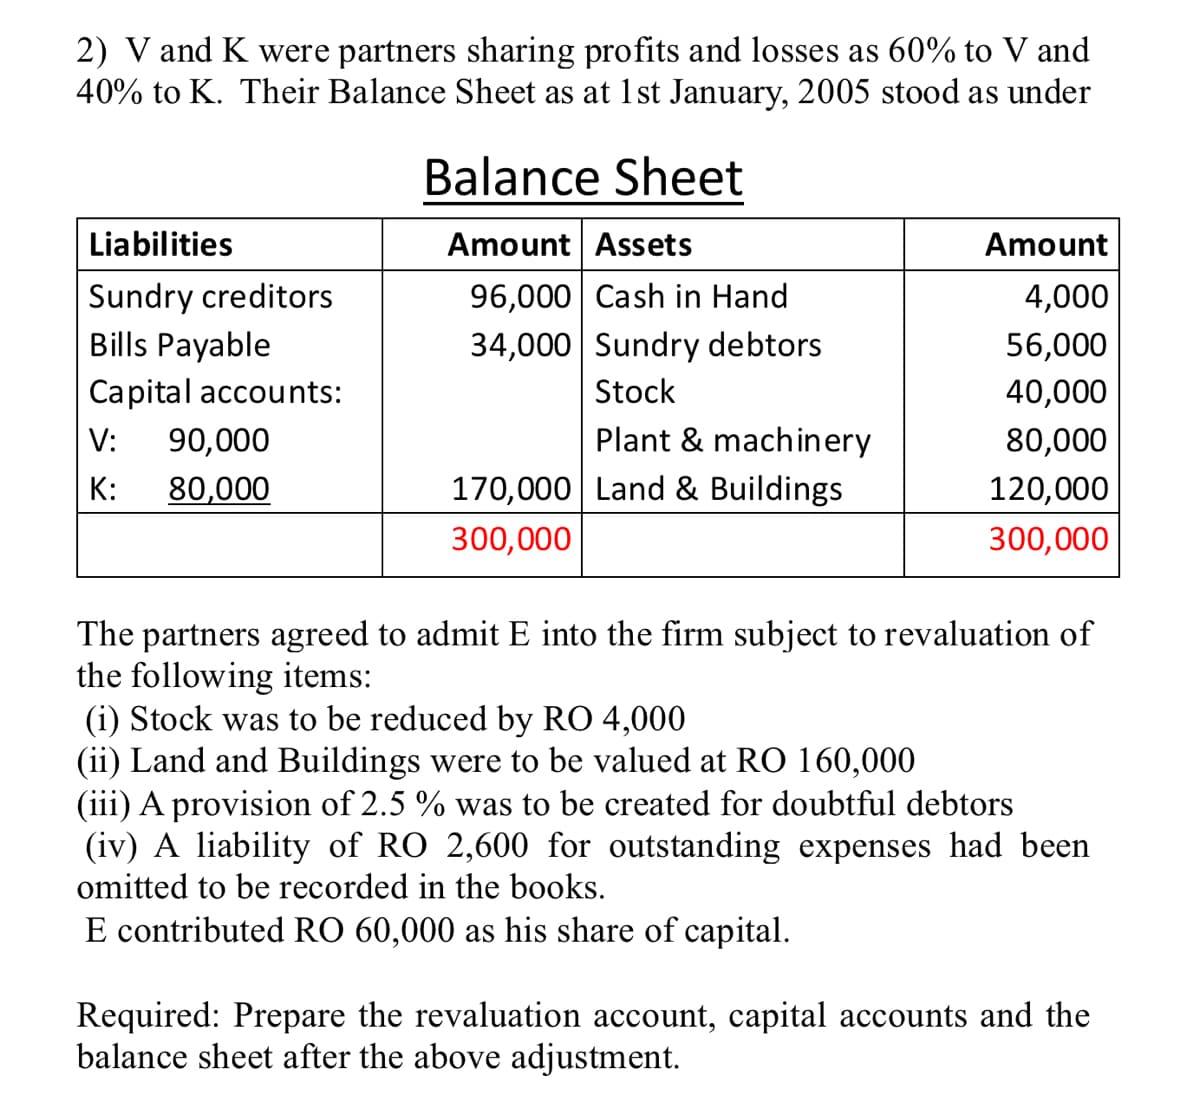 2) V and K were partners sharing profits and losses as 60% to V and
40% to K. Their Balance Sheet as at 1st January, 2005 stood as under
Balance Sheet
Amount Assets
Amount
Liabilities
Sundry creditors
96,000 Cash in Hand
4,000
Bills Payable
34,000 Sundry debtors
56,000
Capital accounts:
Stock
40,000
V:
90,000
Plant & machinery
80,000
K: 80,000
120,000
170,000 Land & Buildings
300,000
300,000
The partners agreed to admit E into the firm subject to revaluation of
the following items:
(i) Stock was to be reduced by RO 4,000
(ii) Land and Buildings were to be valued at RO 160,000
(iii) A provision of 2.5 % was to be created for doubtful debtors
(iv) A liability of RO 2,600 for outstanding expenses had been
omitted to be recorded in the books.
E contributed RO 60,000 as his share of capital.
Required: Prepare the revaluation account, capital accounts and the
balance sheet after the above adjustment.